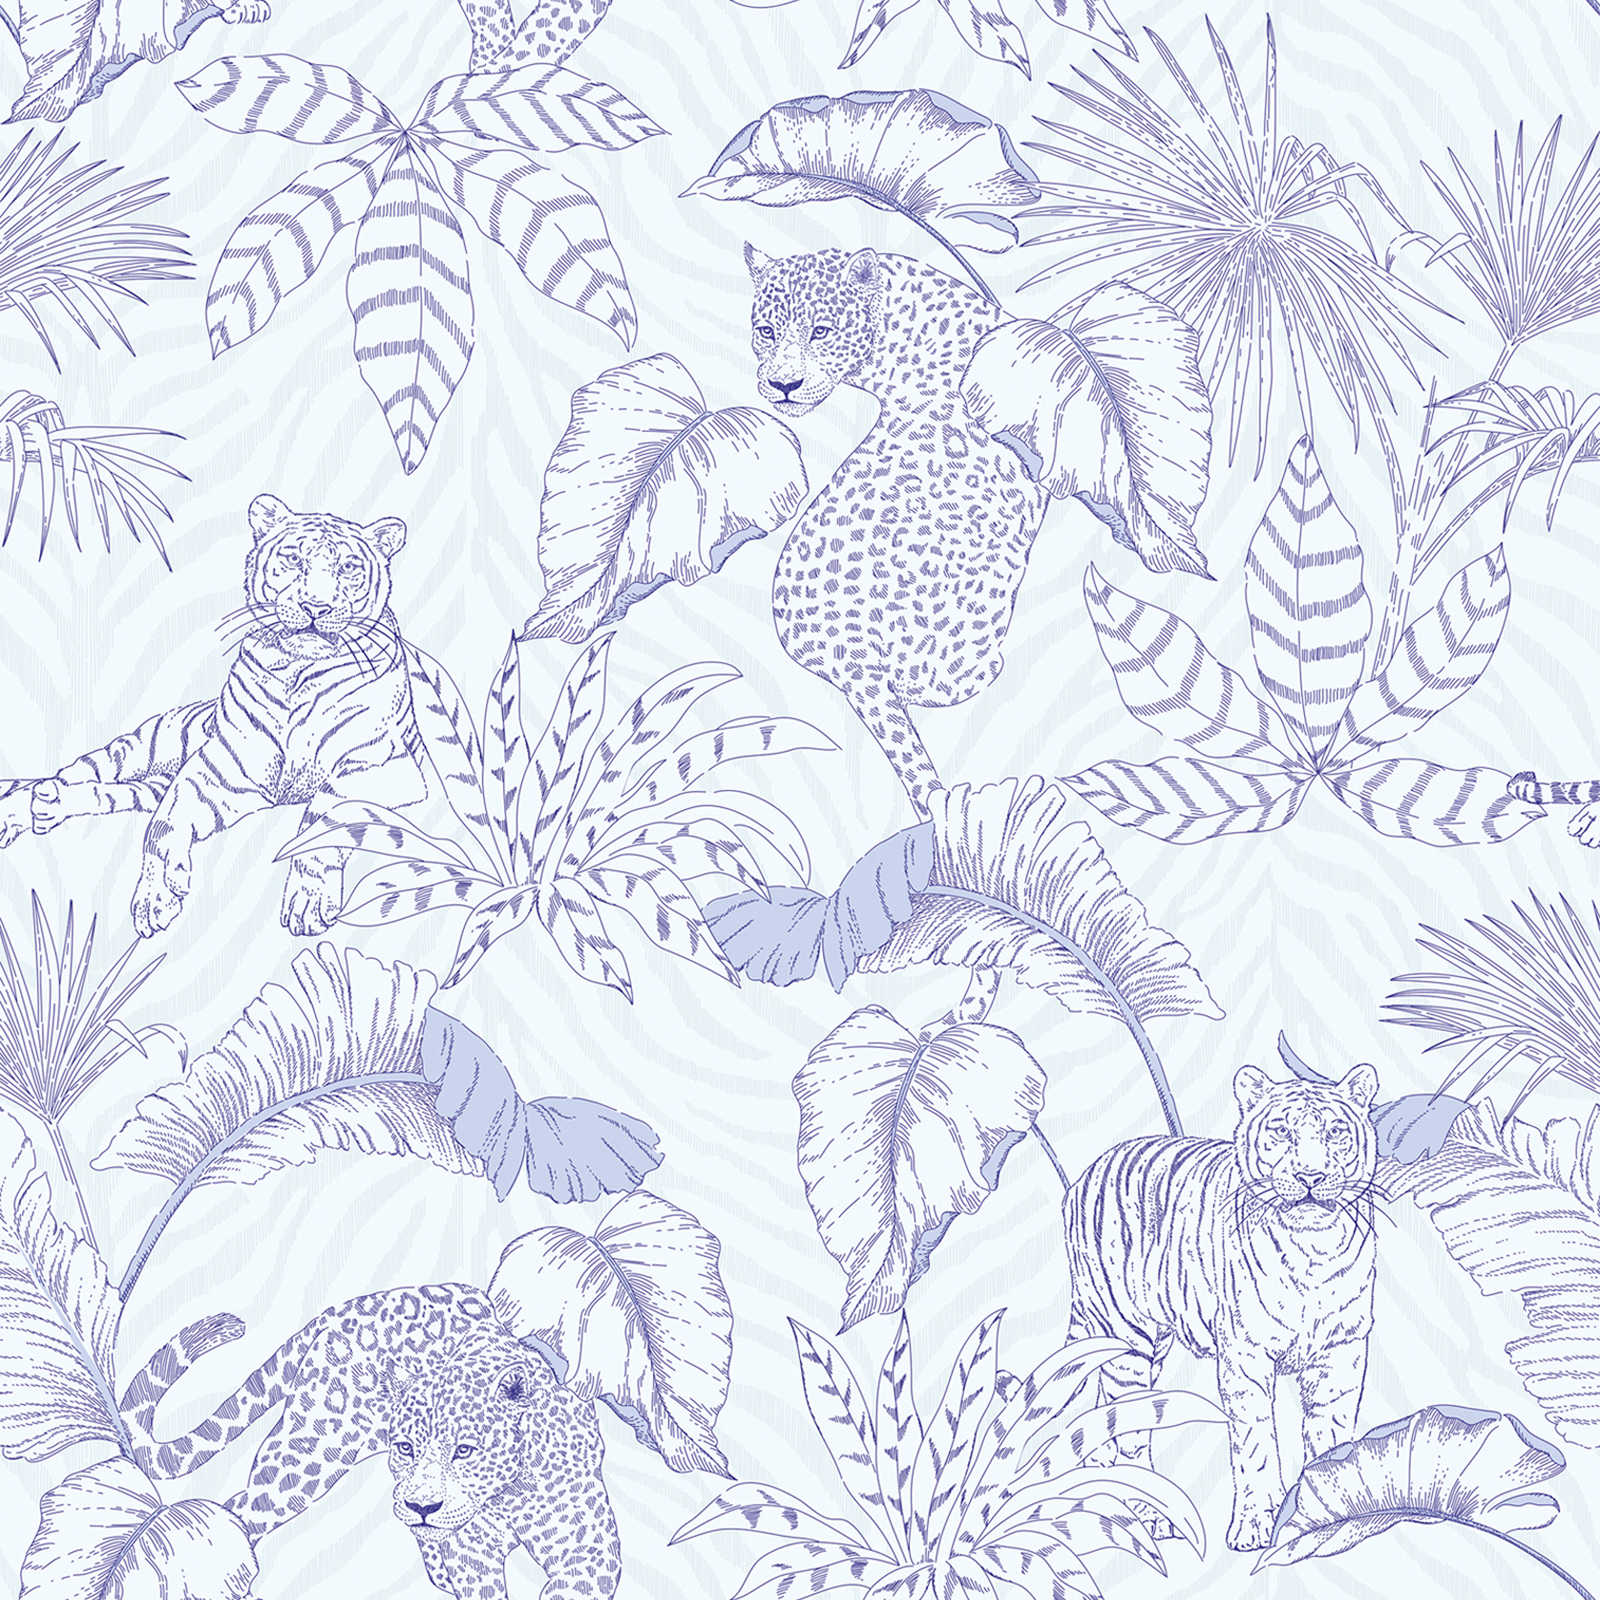 Jungle motif non-woven wallpaper with tigers and leopards - purple, white
